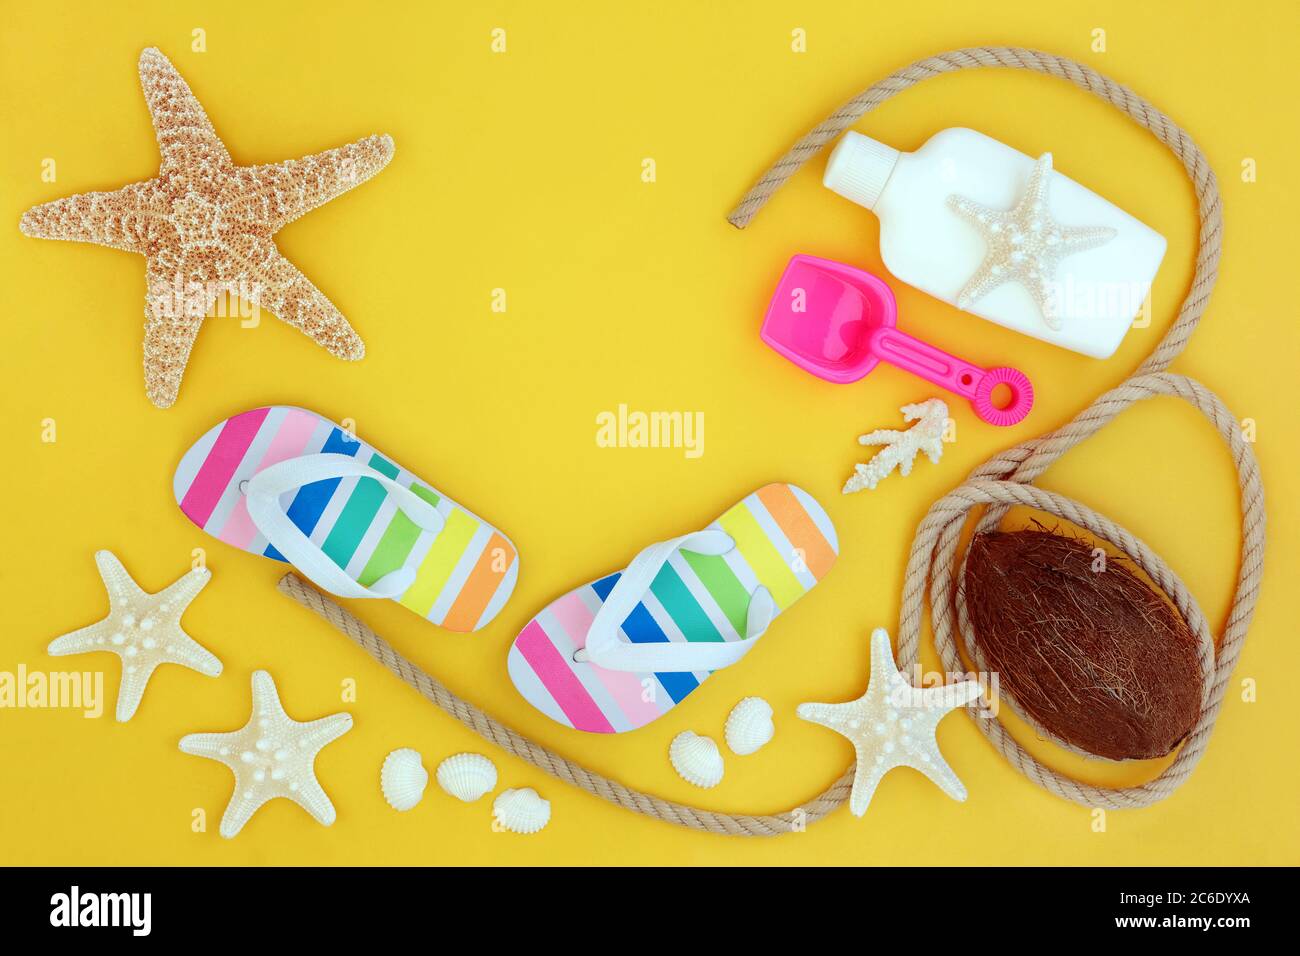 Summer holiday beach items with seashells, flip flops, coconut, rope and suntan protection lotion. Themed concept on yellow background with copy space Stock Photo